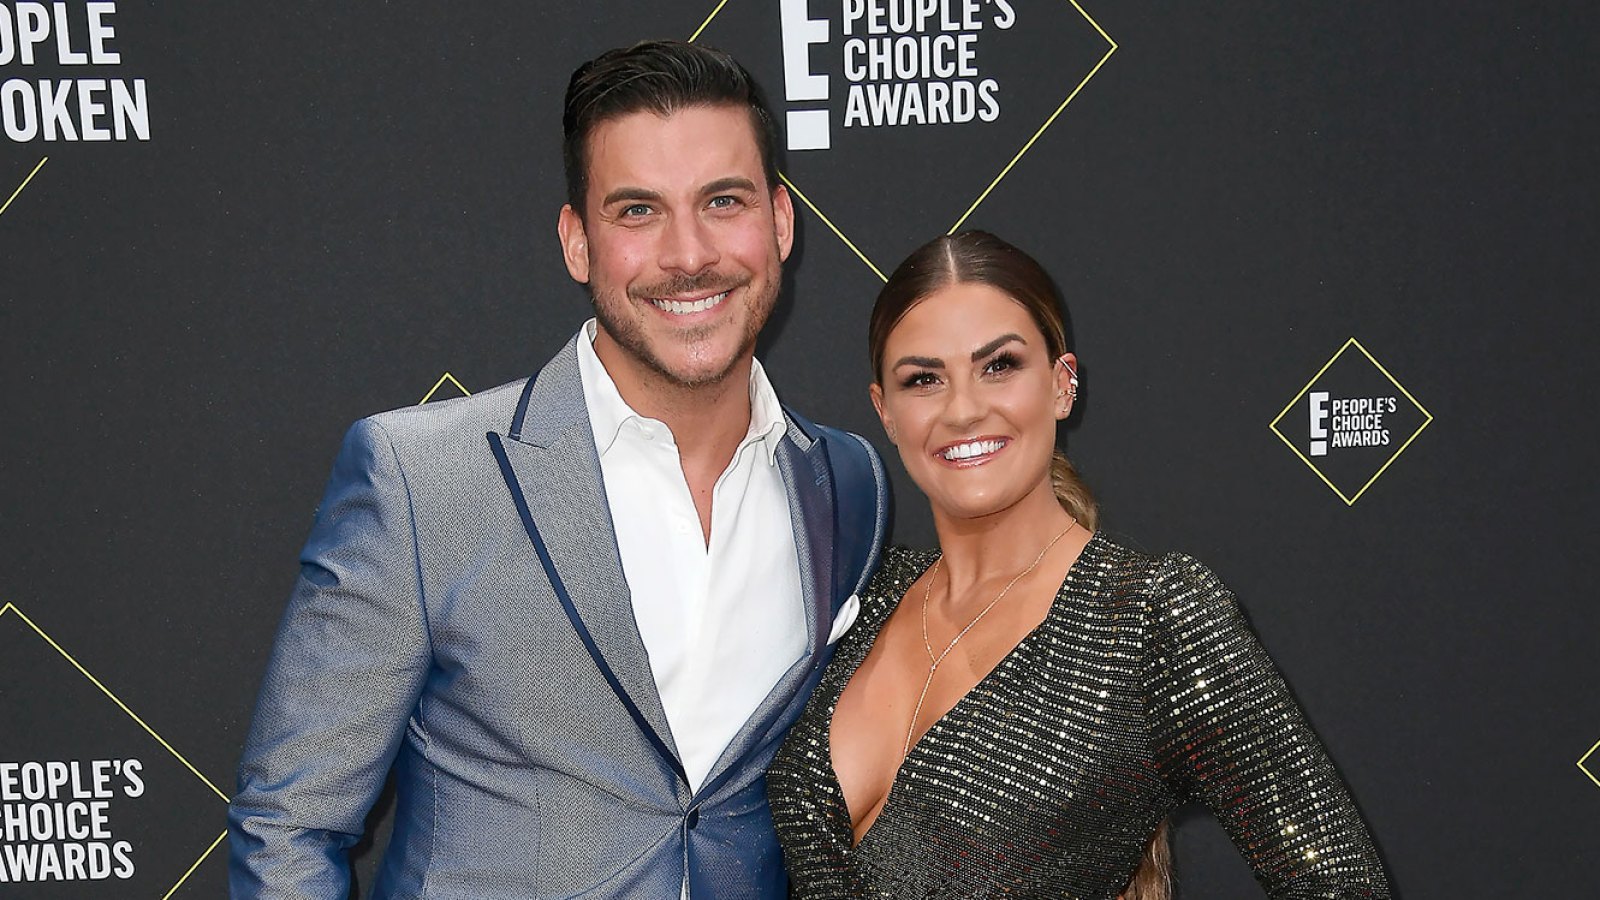 Feature The Valley Jax Taylor and Brittany Cartwright Reveal Where They Stand During Separation